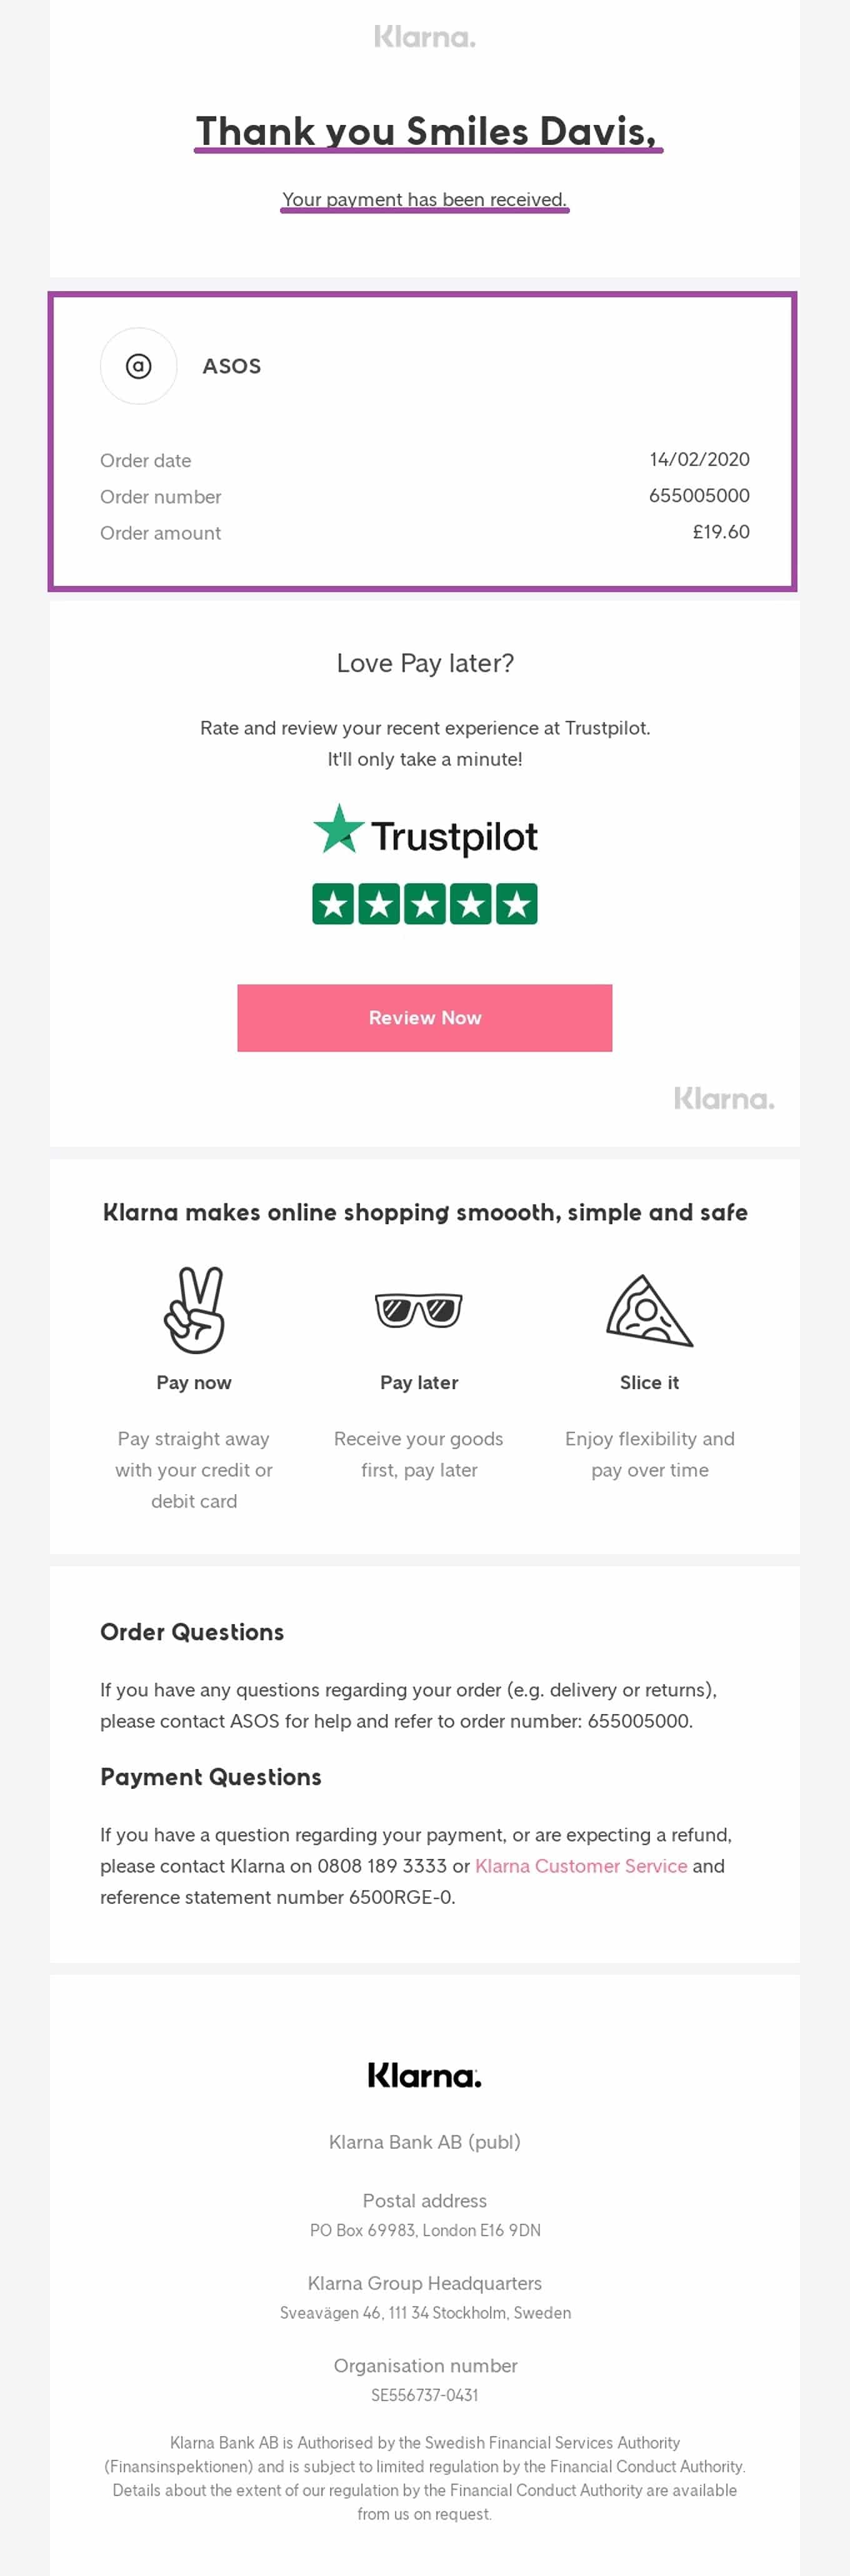 Transactional/post-purchase email example